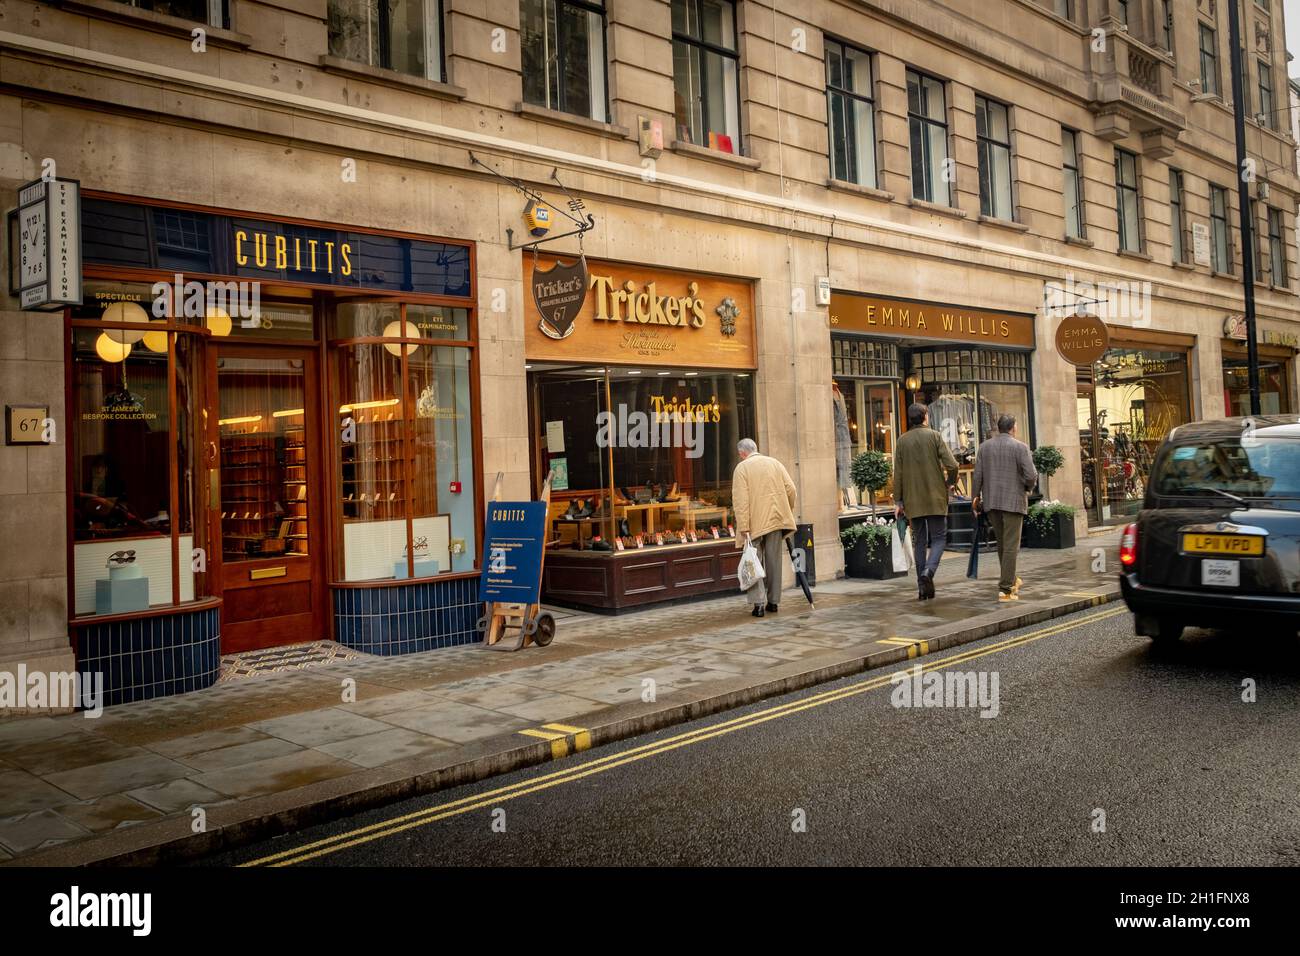 London- Trickers and Cubitts shops on Jermyn Street in St James. A shopping street famous for its upmarket luxury brands Stock Photo